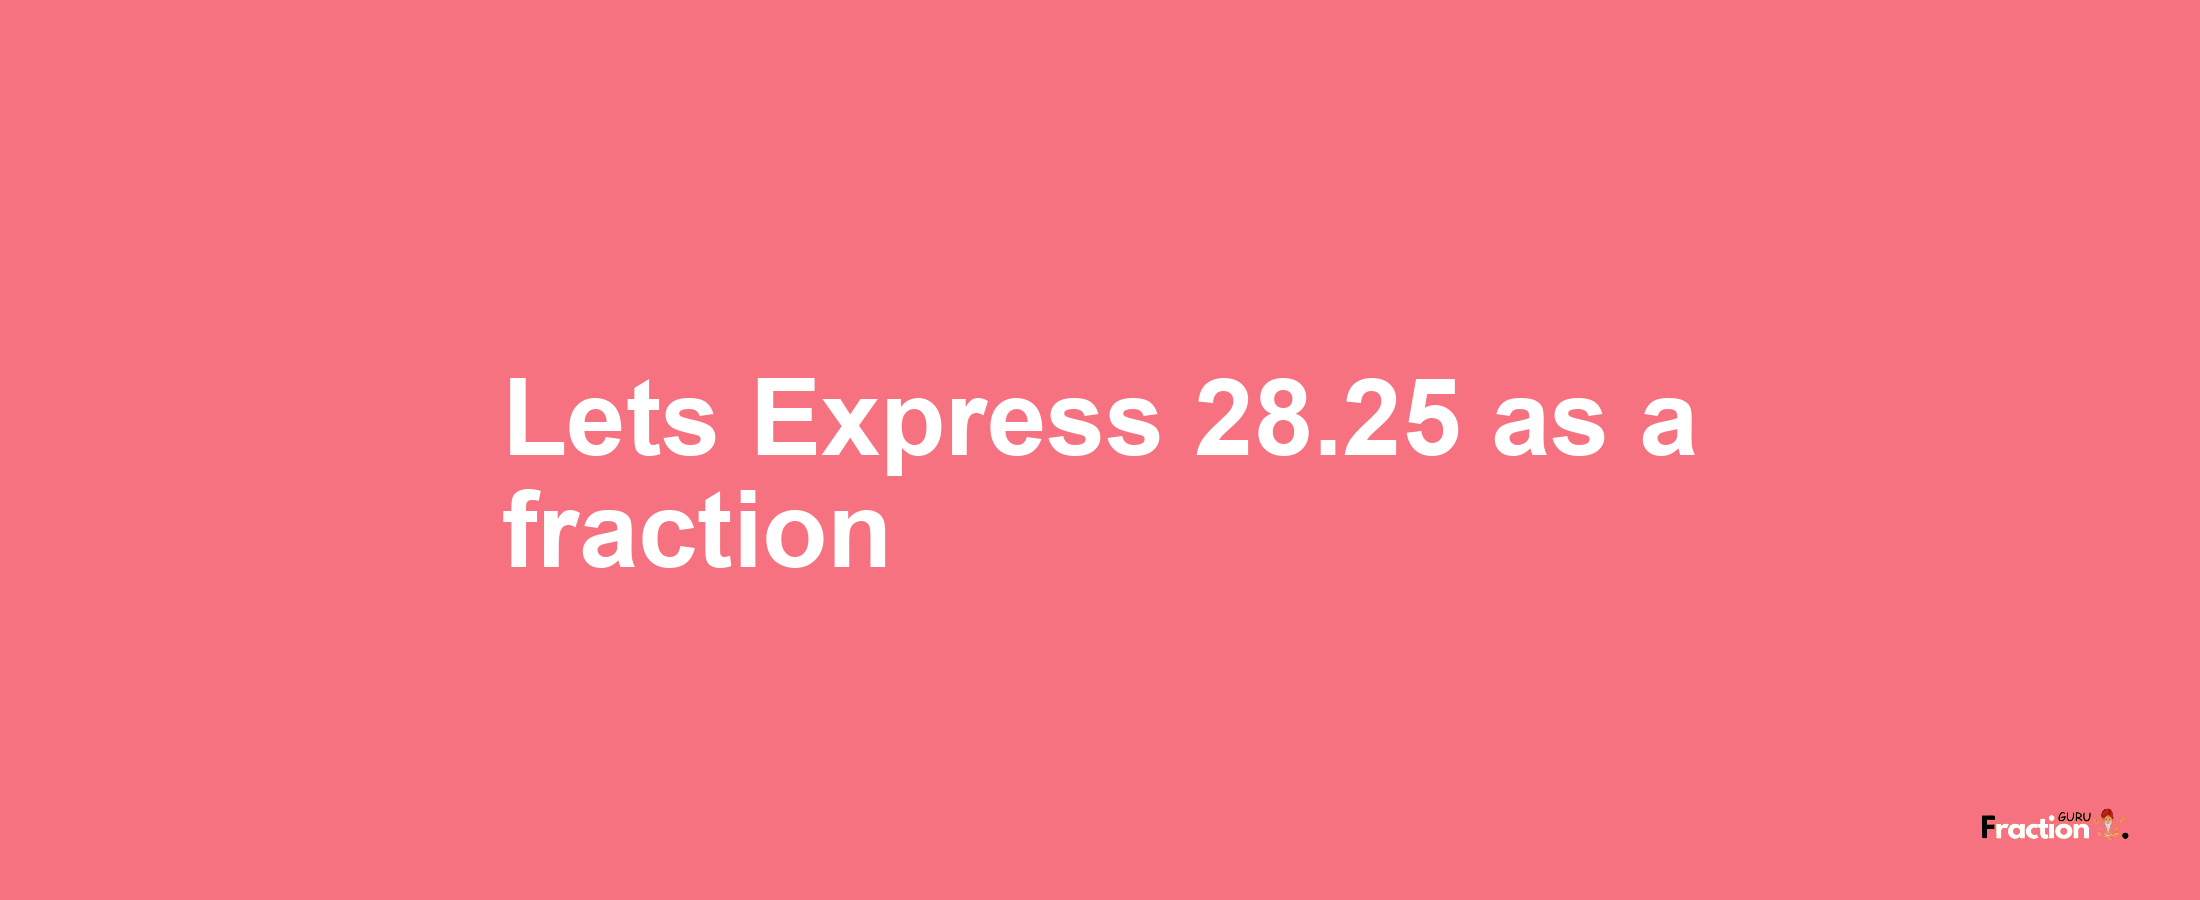 Lets Express 28.25 as afraction